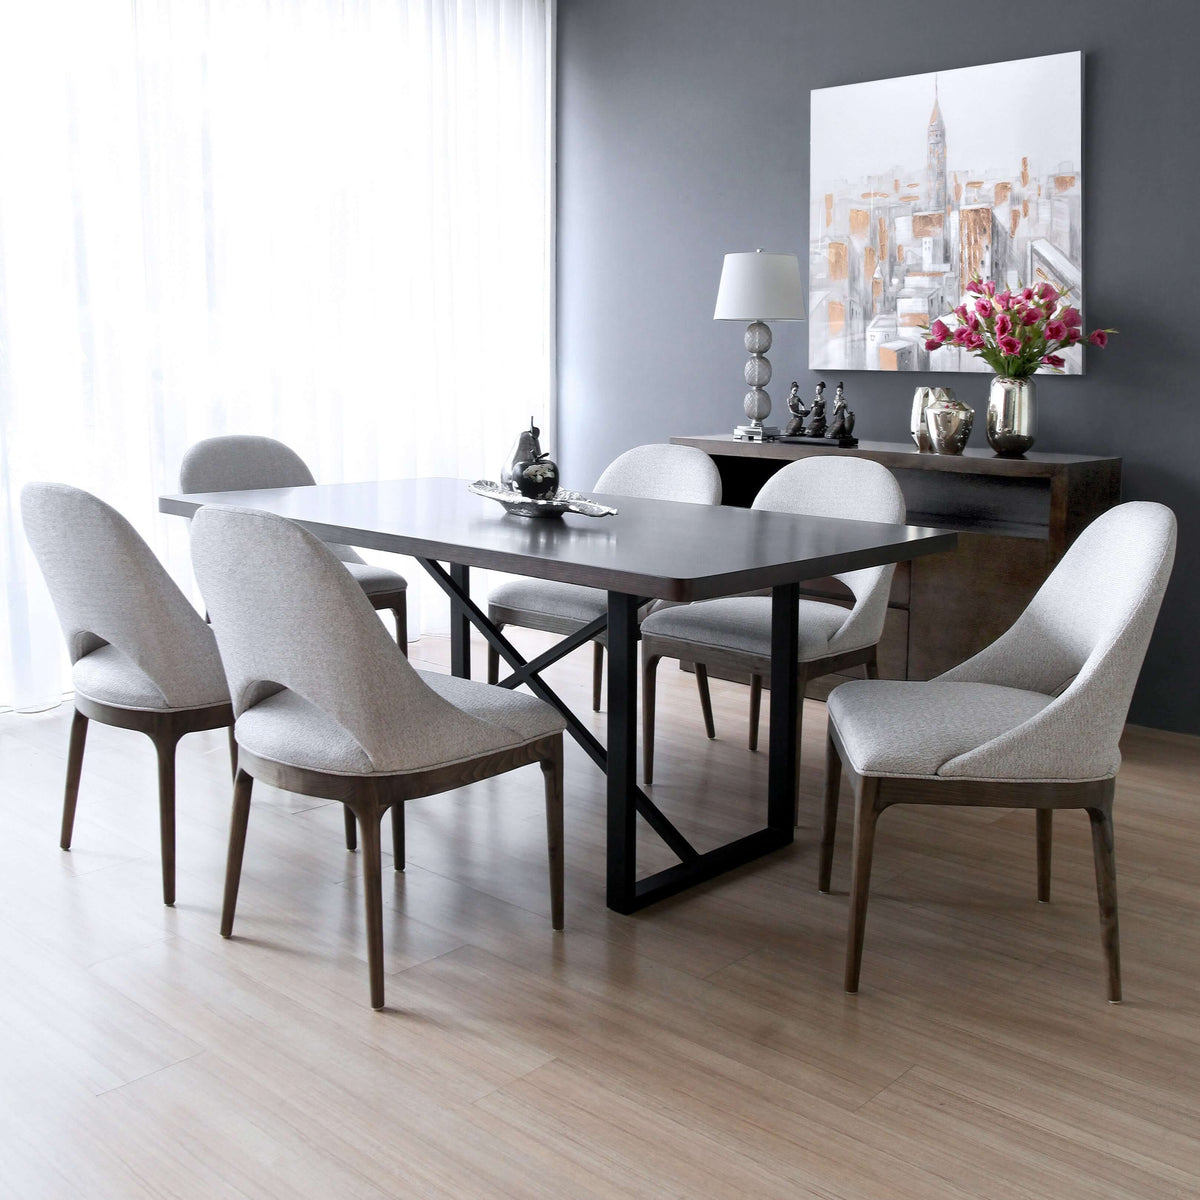 a slim and chic dining chair from the slimline collection in a room view